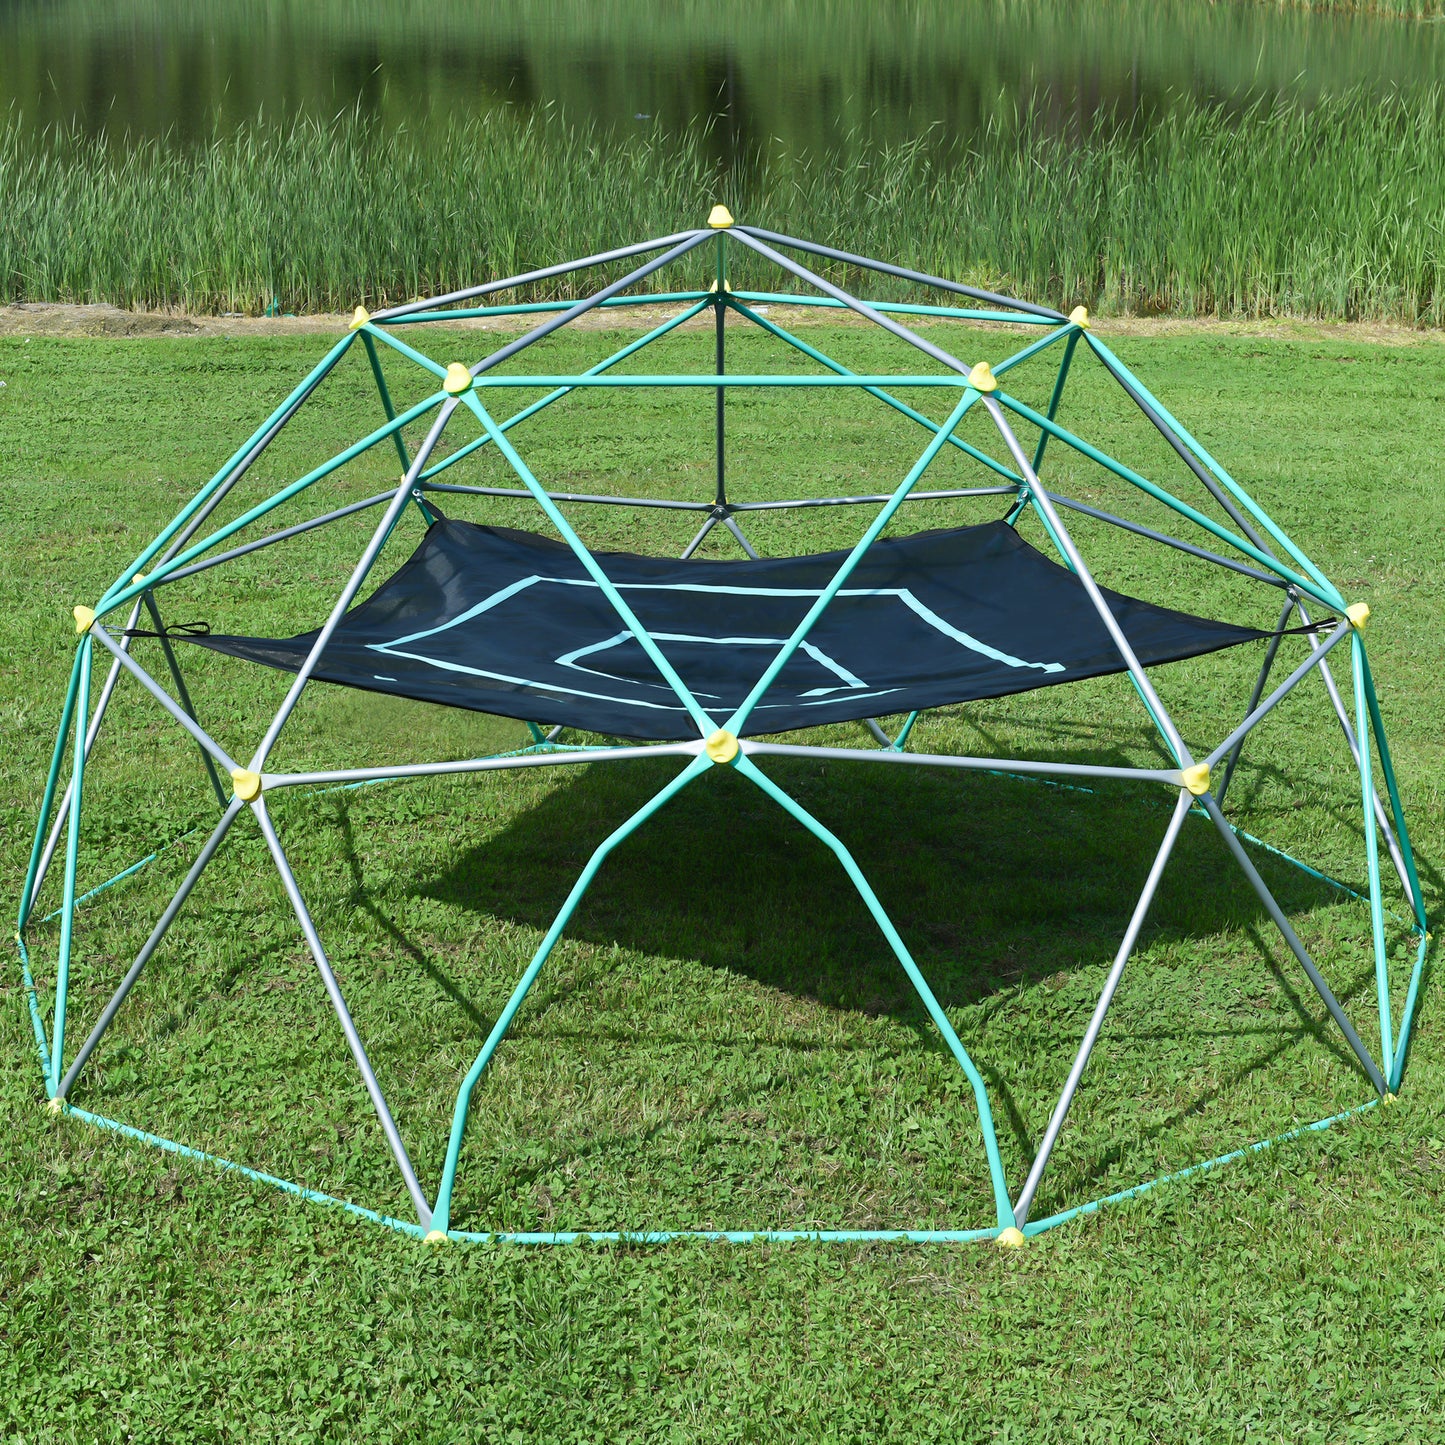 10ft Geometric Dome Climber Play Center, Kids Climbing Dome Tower with Hammock, Rust & UV Resistant Steel Supporting 1000 LBS